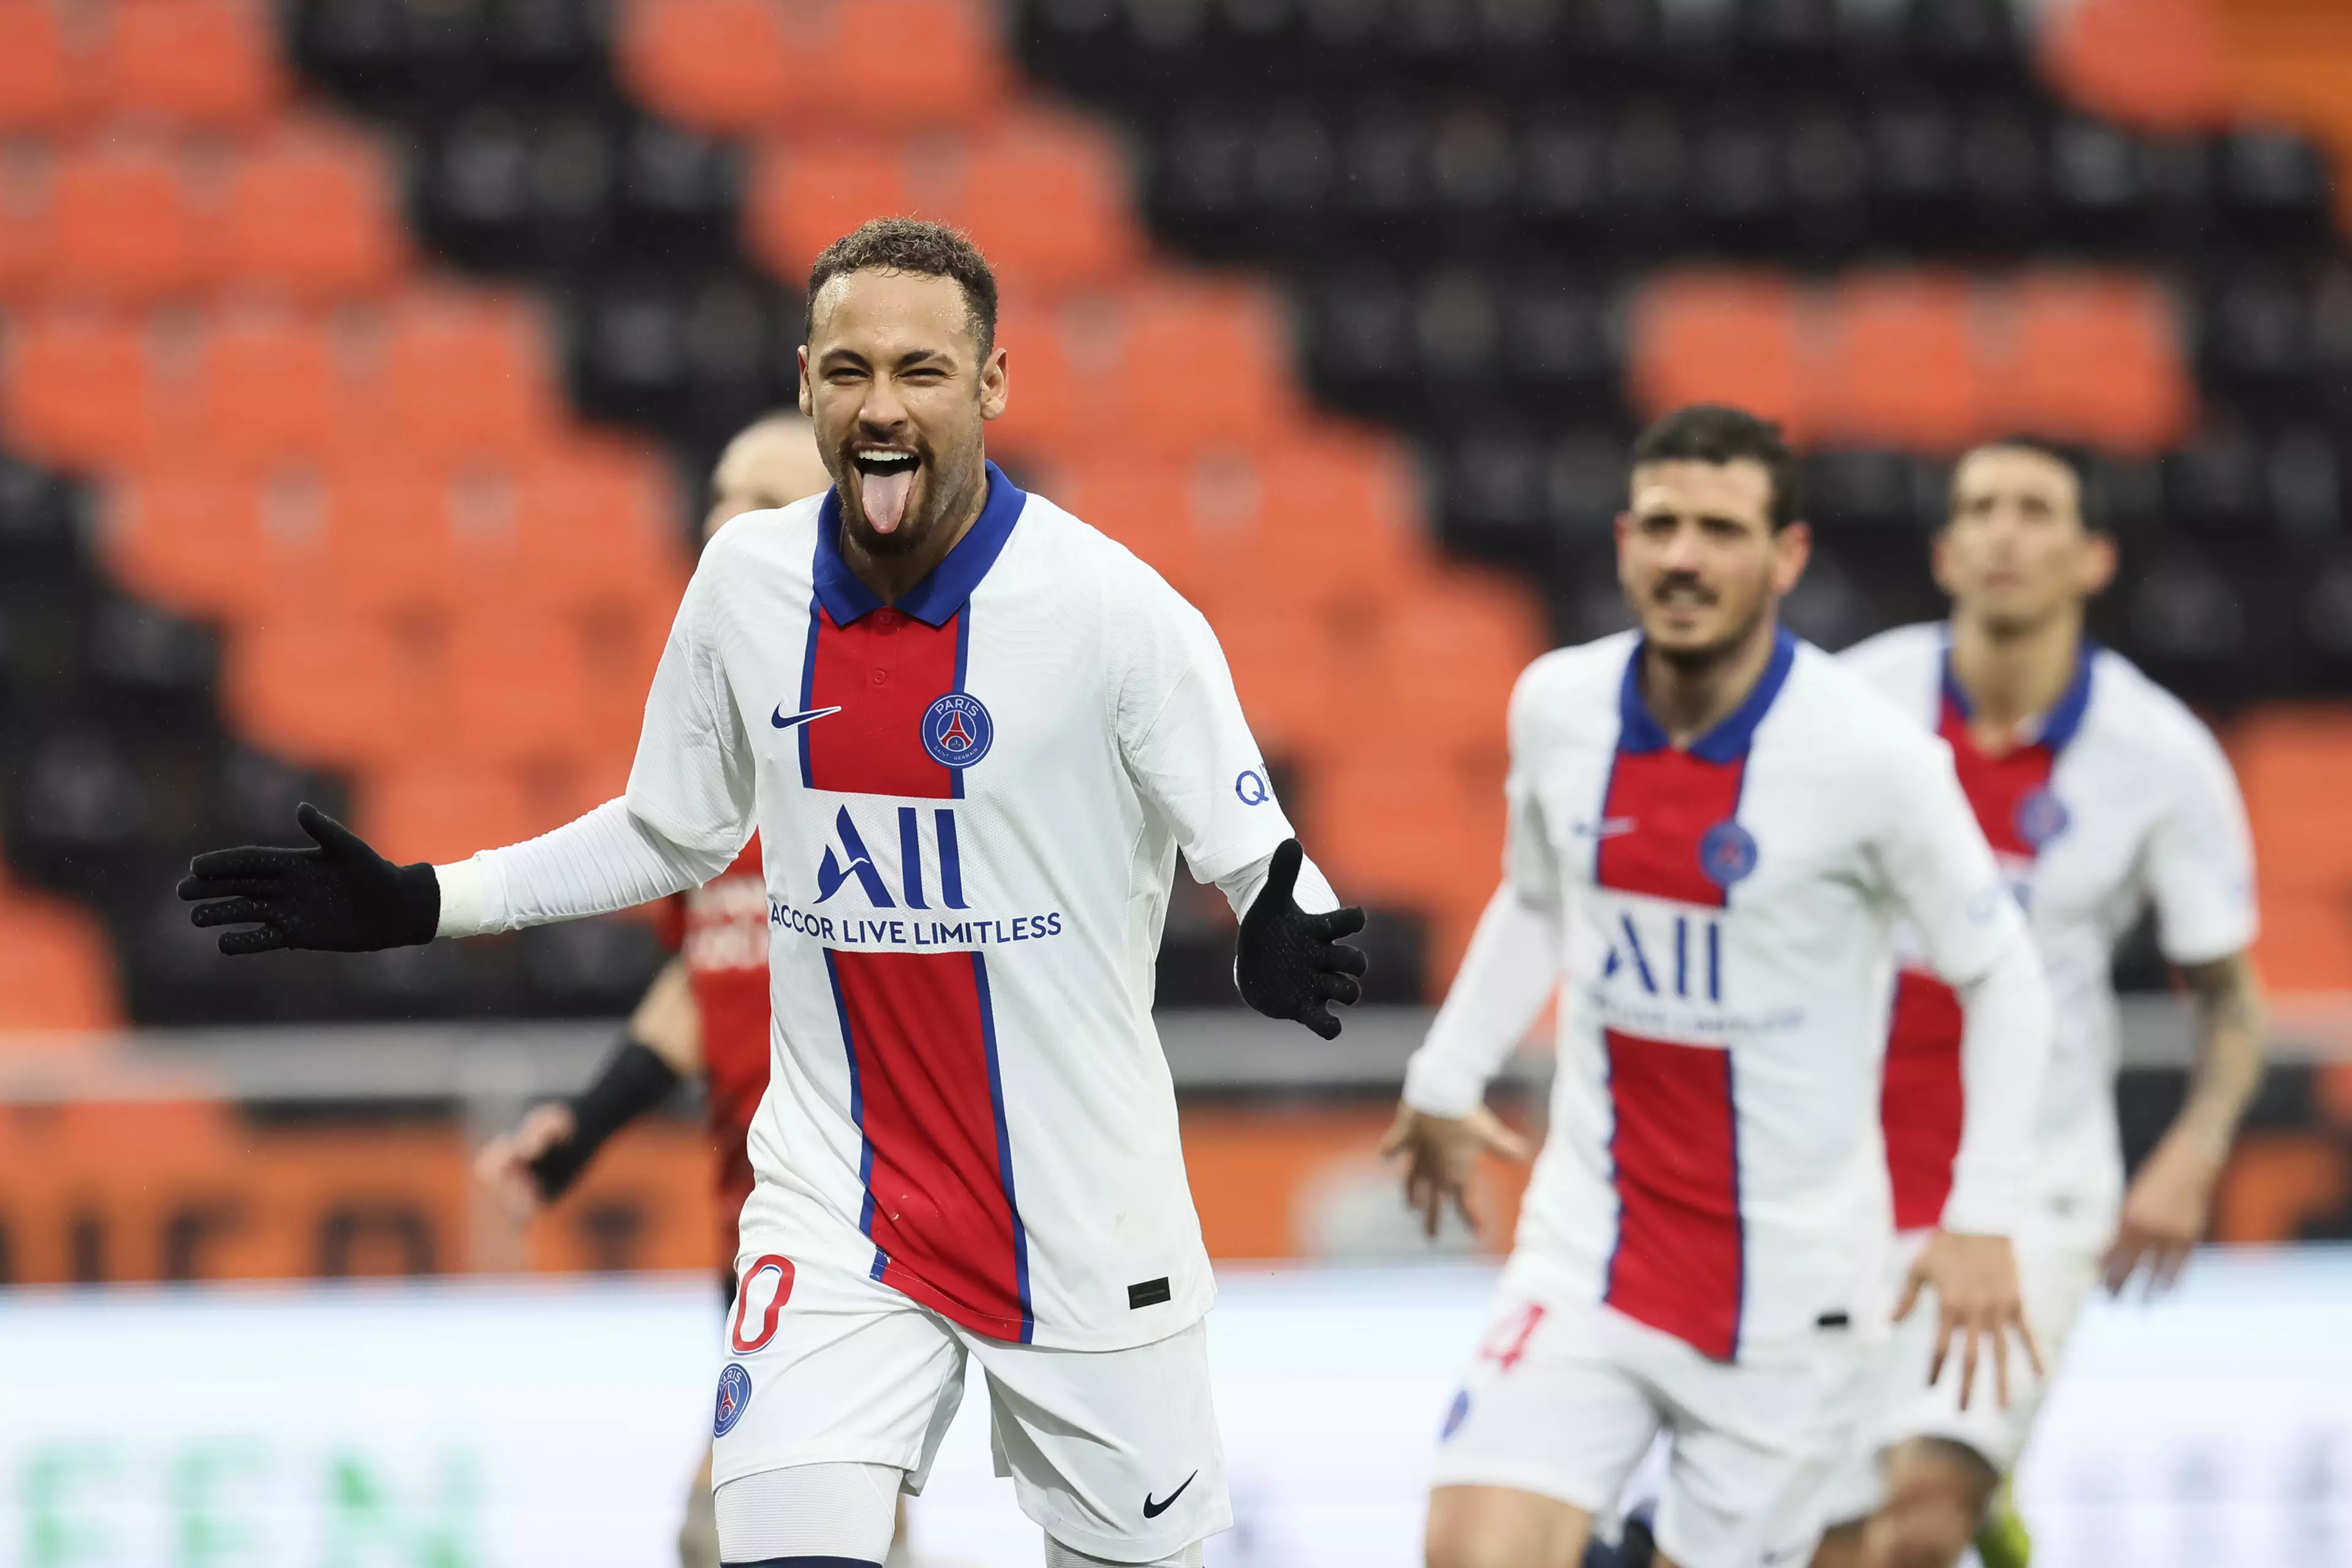 Looks like Neymar will be celebrating his goals in Paris and not Newcastle for a bit longer. Image: PA Images